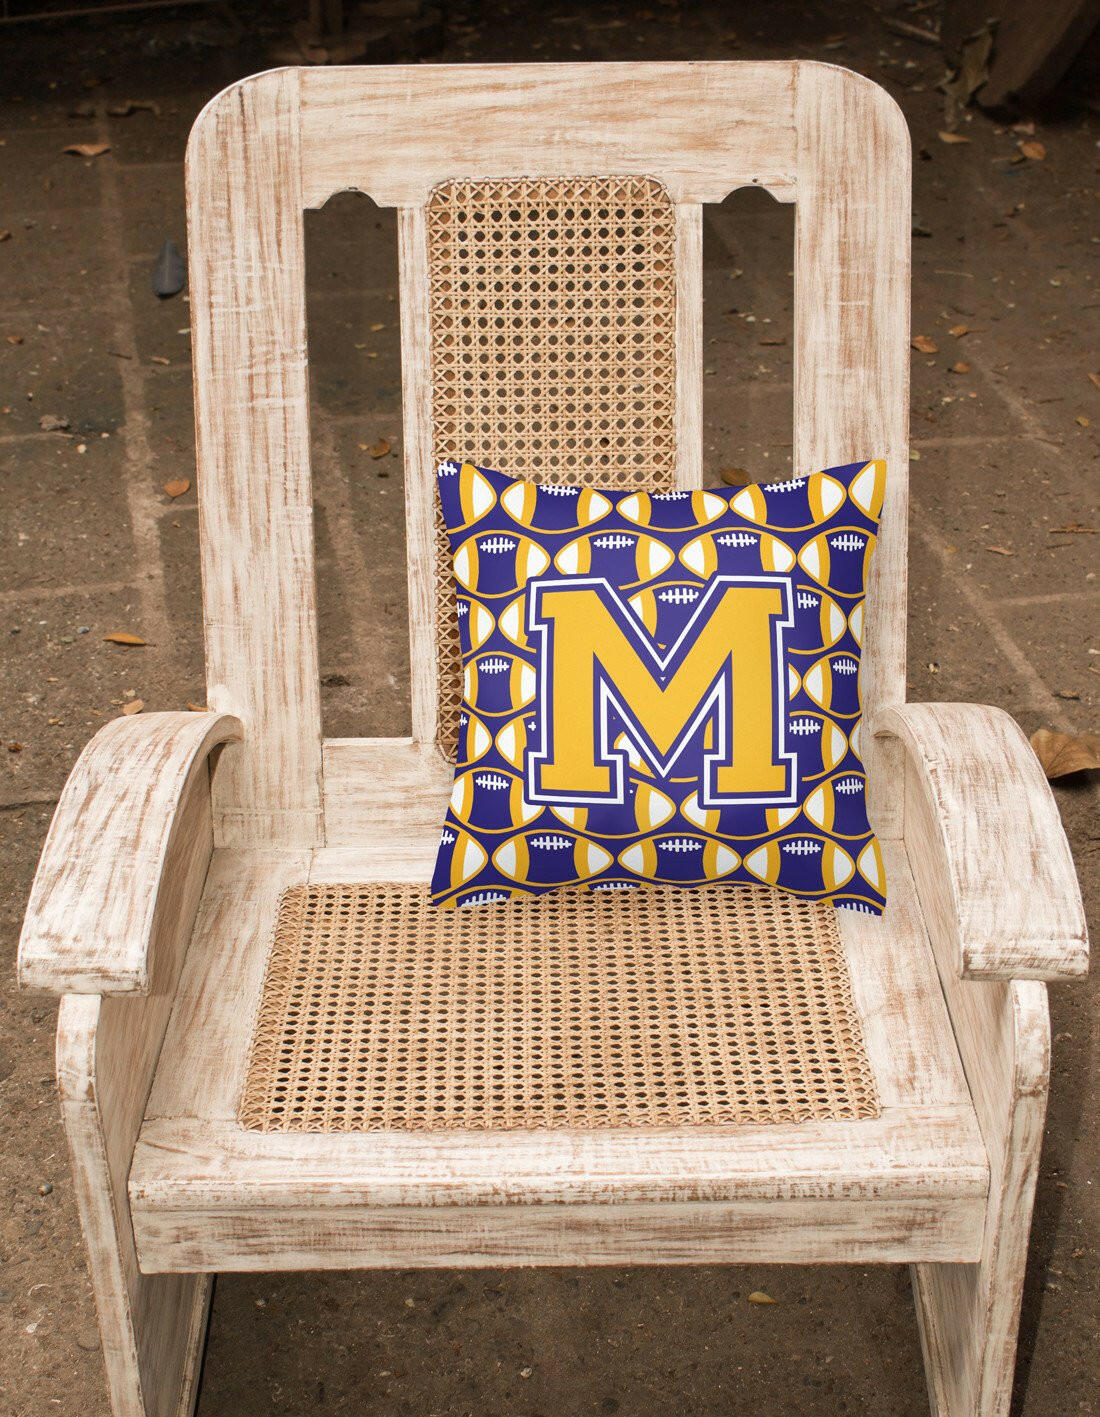 Letter M Football Purple and Gold Fabric Decorative Pillow CJ1064-MPW1414 by Caroline's Treasures